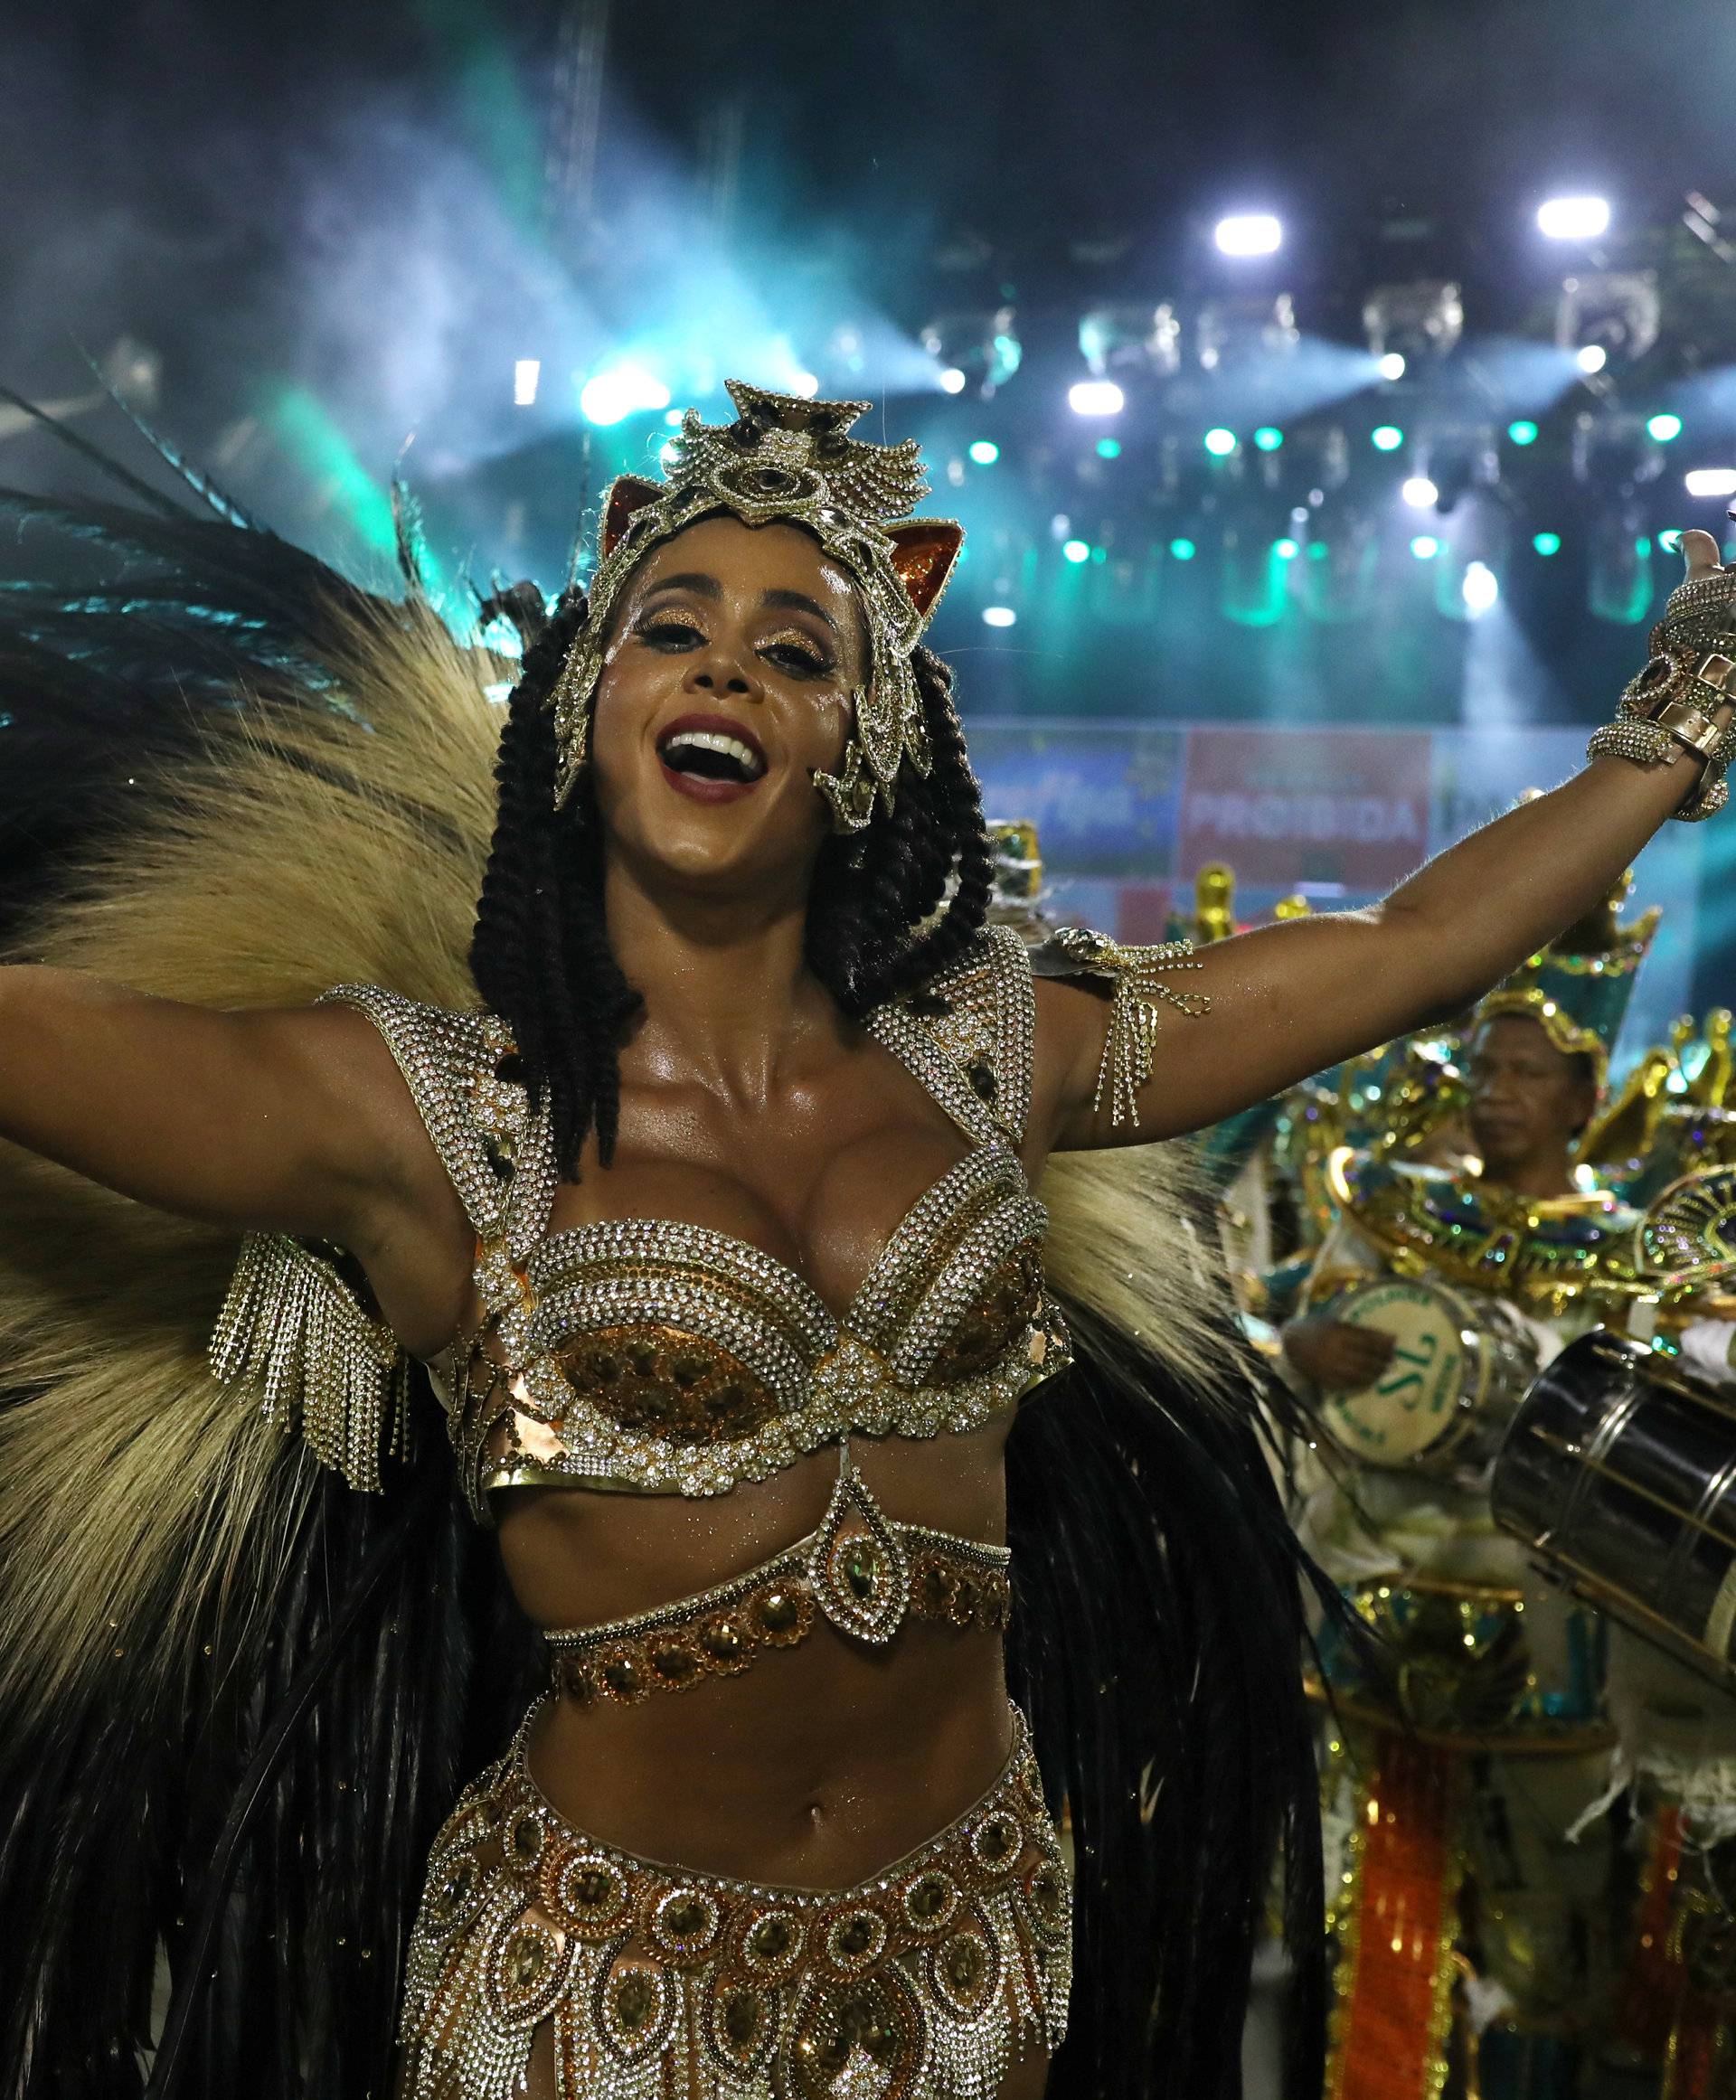 Drum queen Flavia Lyra from Imperatriz samba school performs during the second night of the Carnival parade at the Sambadrome in Rio de Janeiro